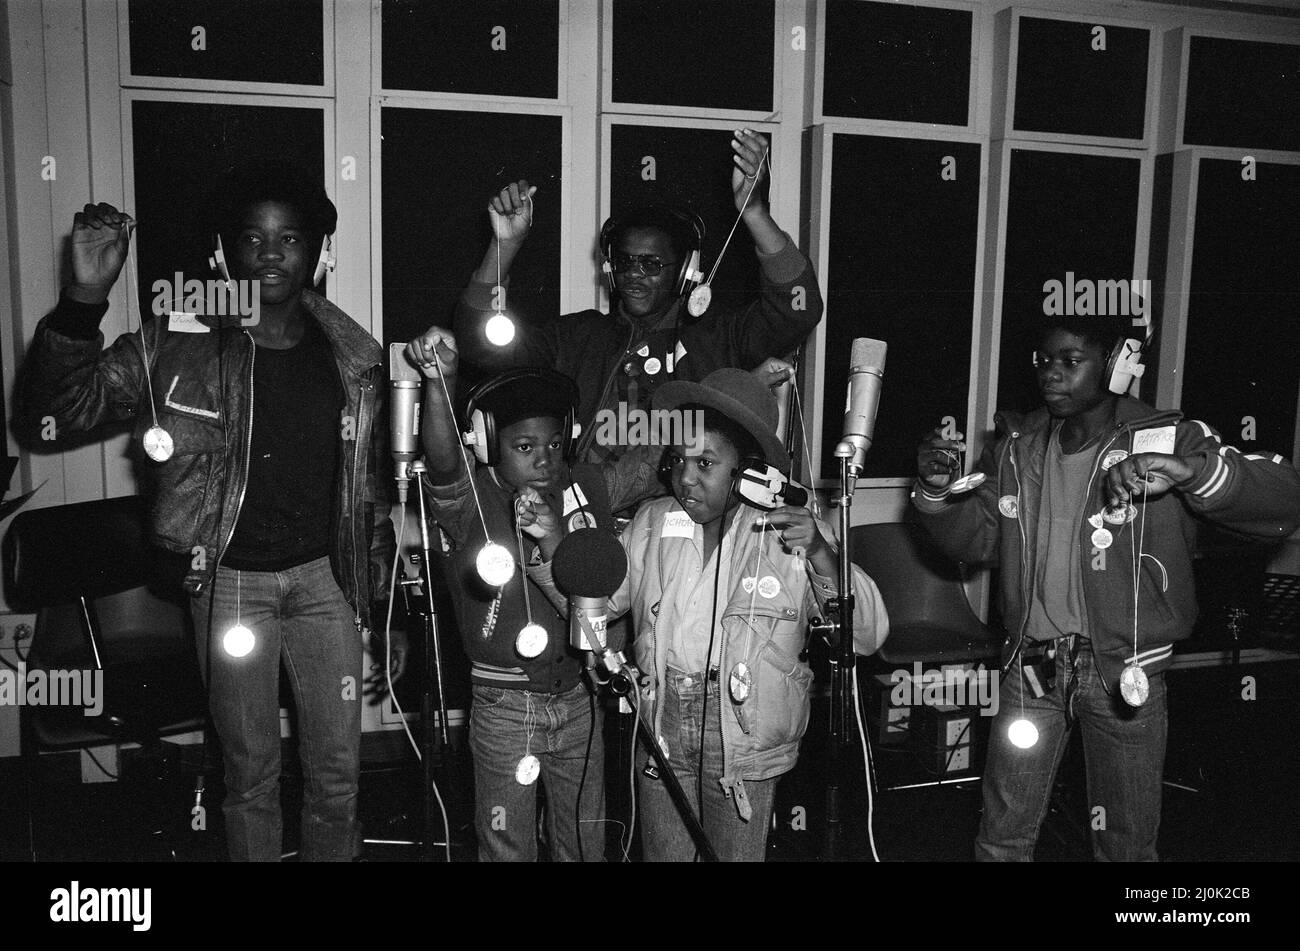 Musical Youth, British Jamaican pop / reggae group, at Capital Radio  studios in London where they are helping to launch a road safety campaign  involving glitter discs 8th October 1982. Members of